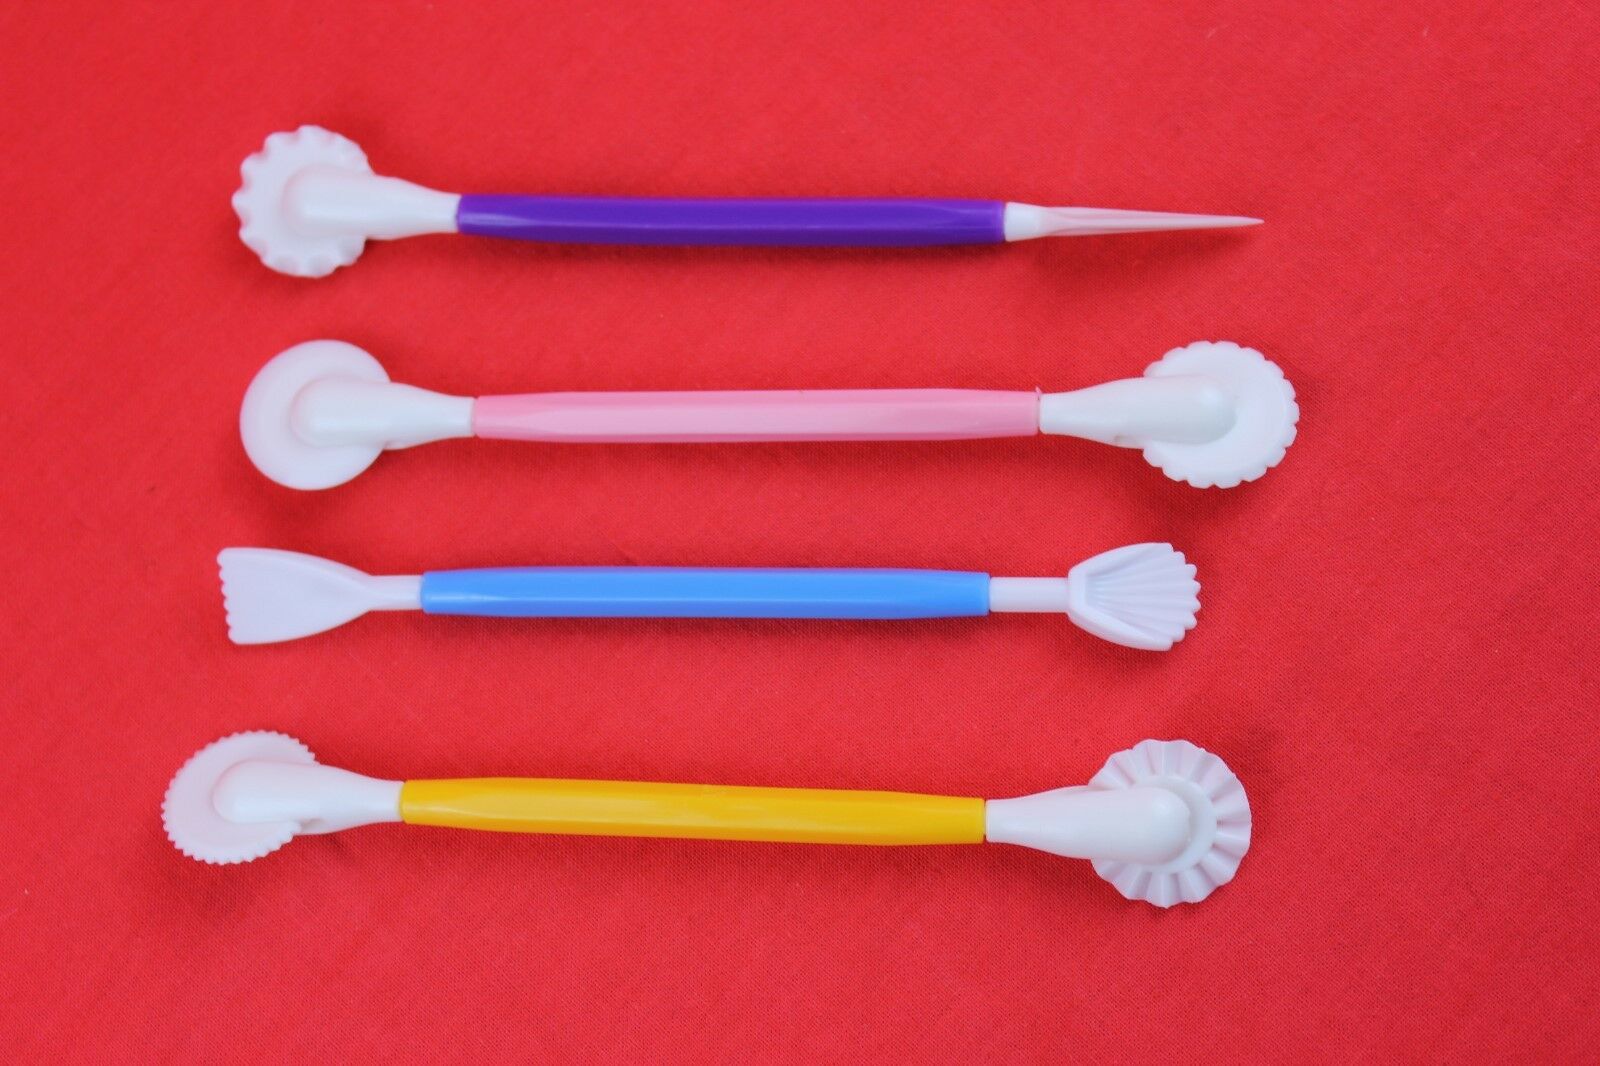 attachment-https://www.cupcakeaddicts.co.uk/wp-content/uploads/imported/7/4-CUPCAKE-DECORATING-EQUIPMENT-TOOLS-MODELLING-SET-SUGARCRAFT-CRAFT-ICING-323107198517.jpg